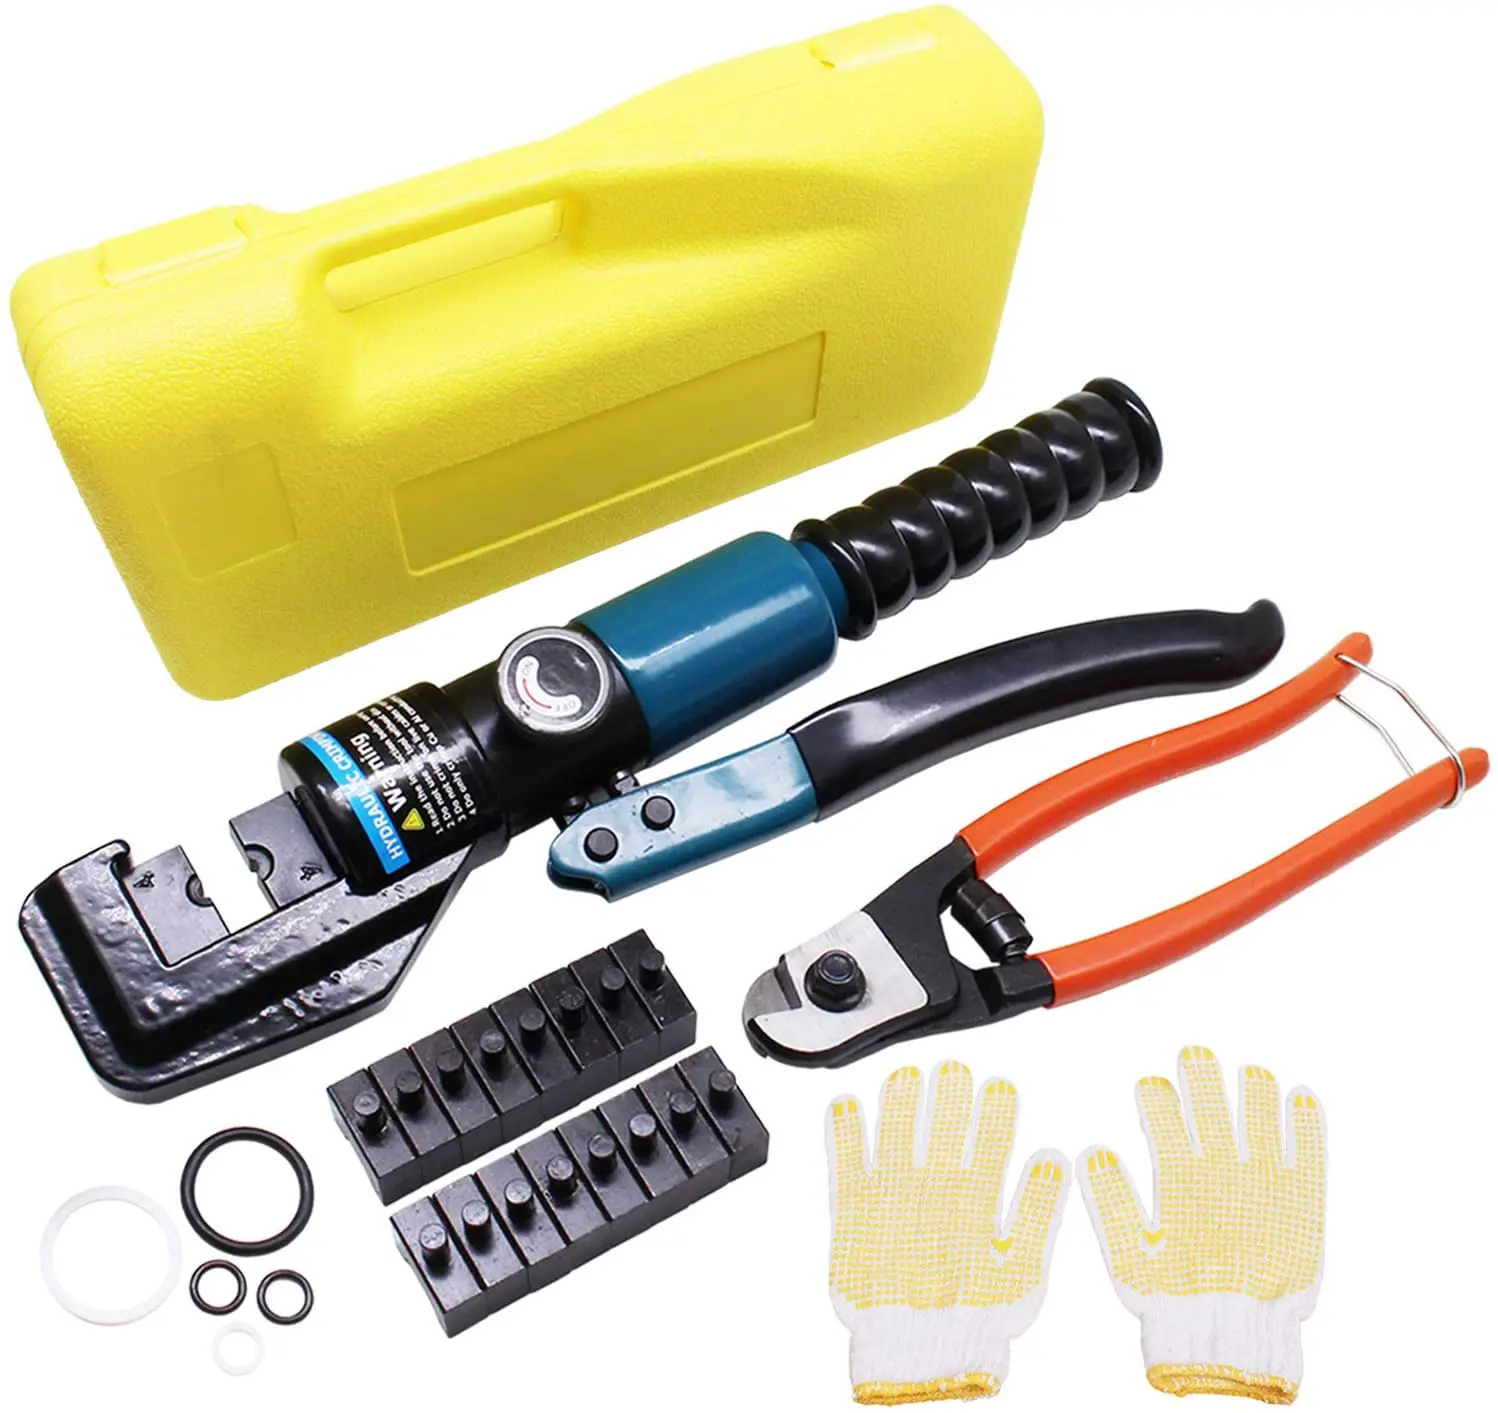 Hydraulic Hand Crimper Tool Hydraulic Wire Crimping Tool Work Gloves Carrying Case 9 set Dies Hydraulic Crimping Tools Cable Cutter 10 Ton Cable Crimper Cable Crimper Kit